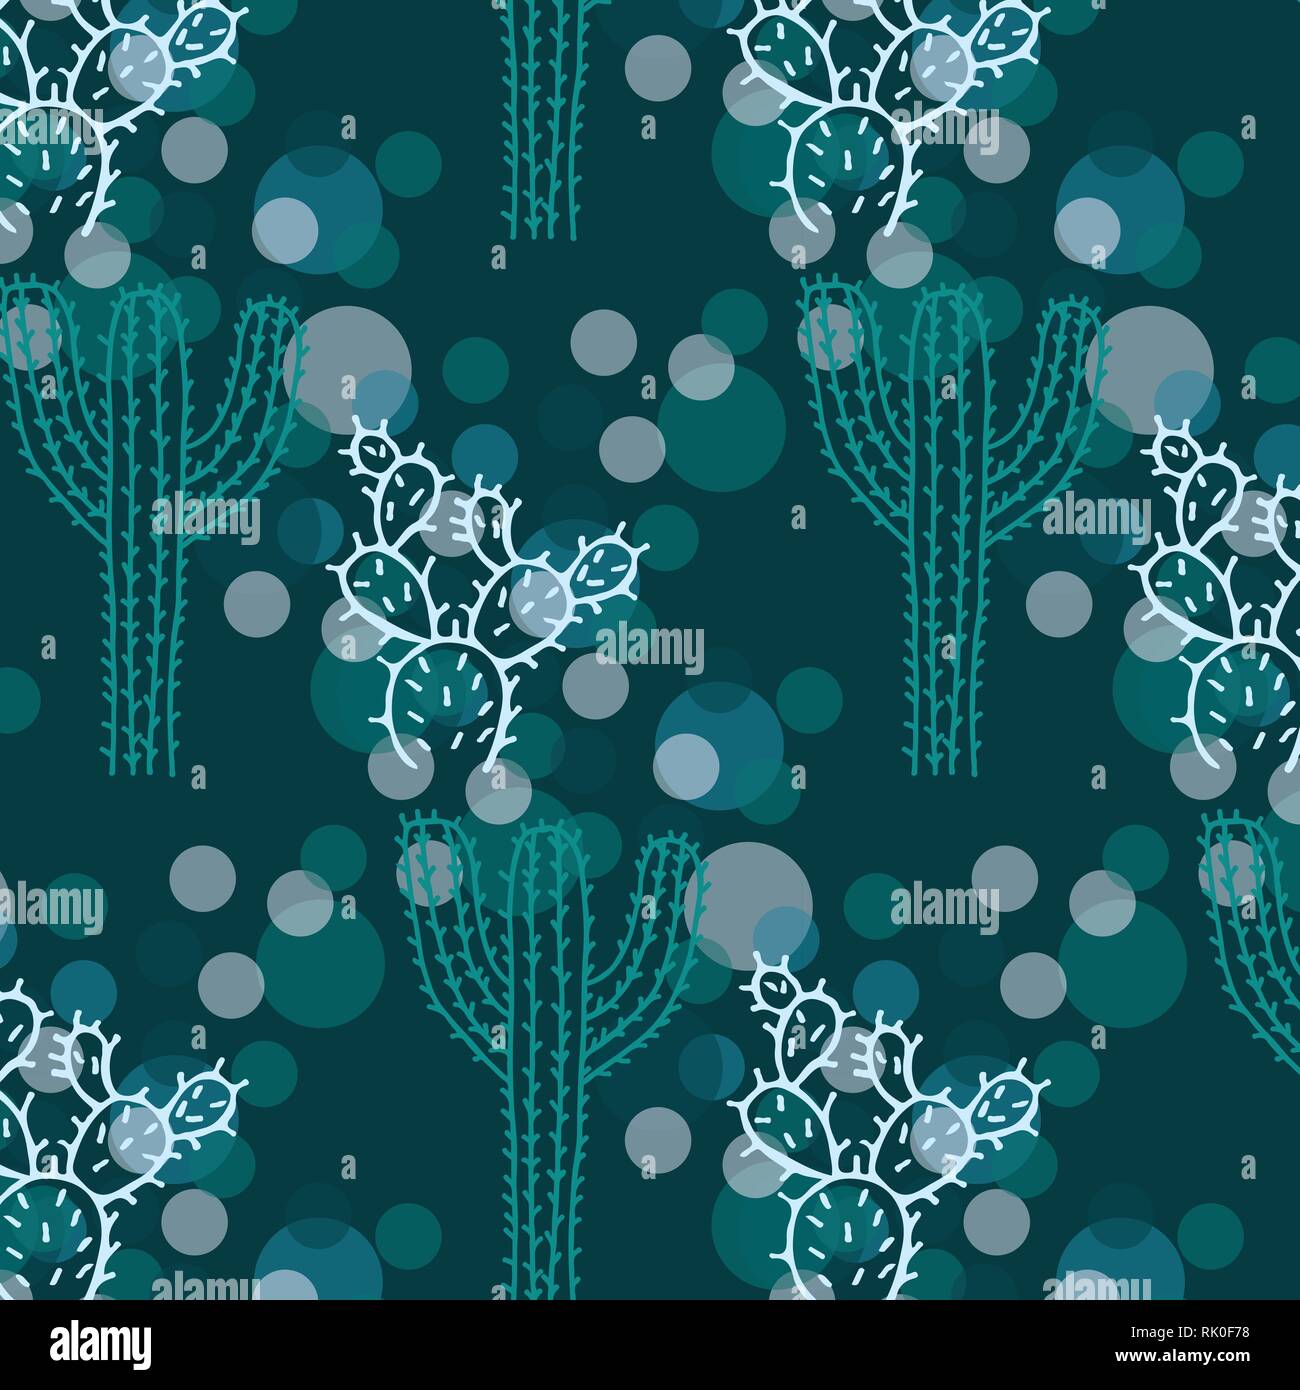 Cactus vector pattern in blue, teal and white color palette Stock Vector